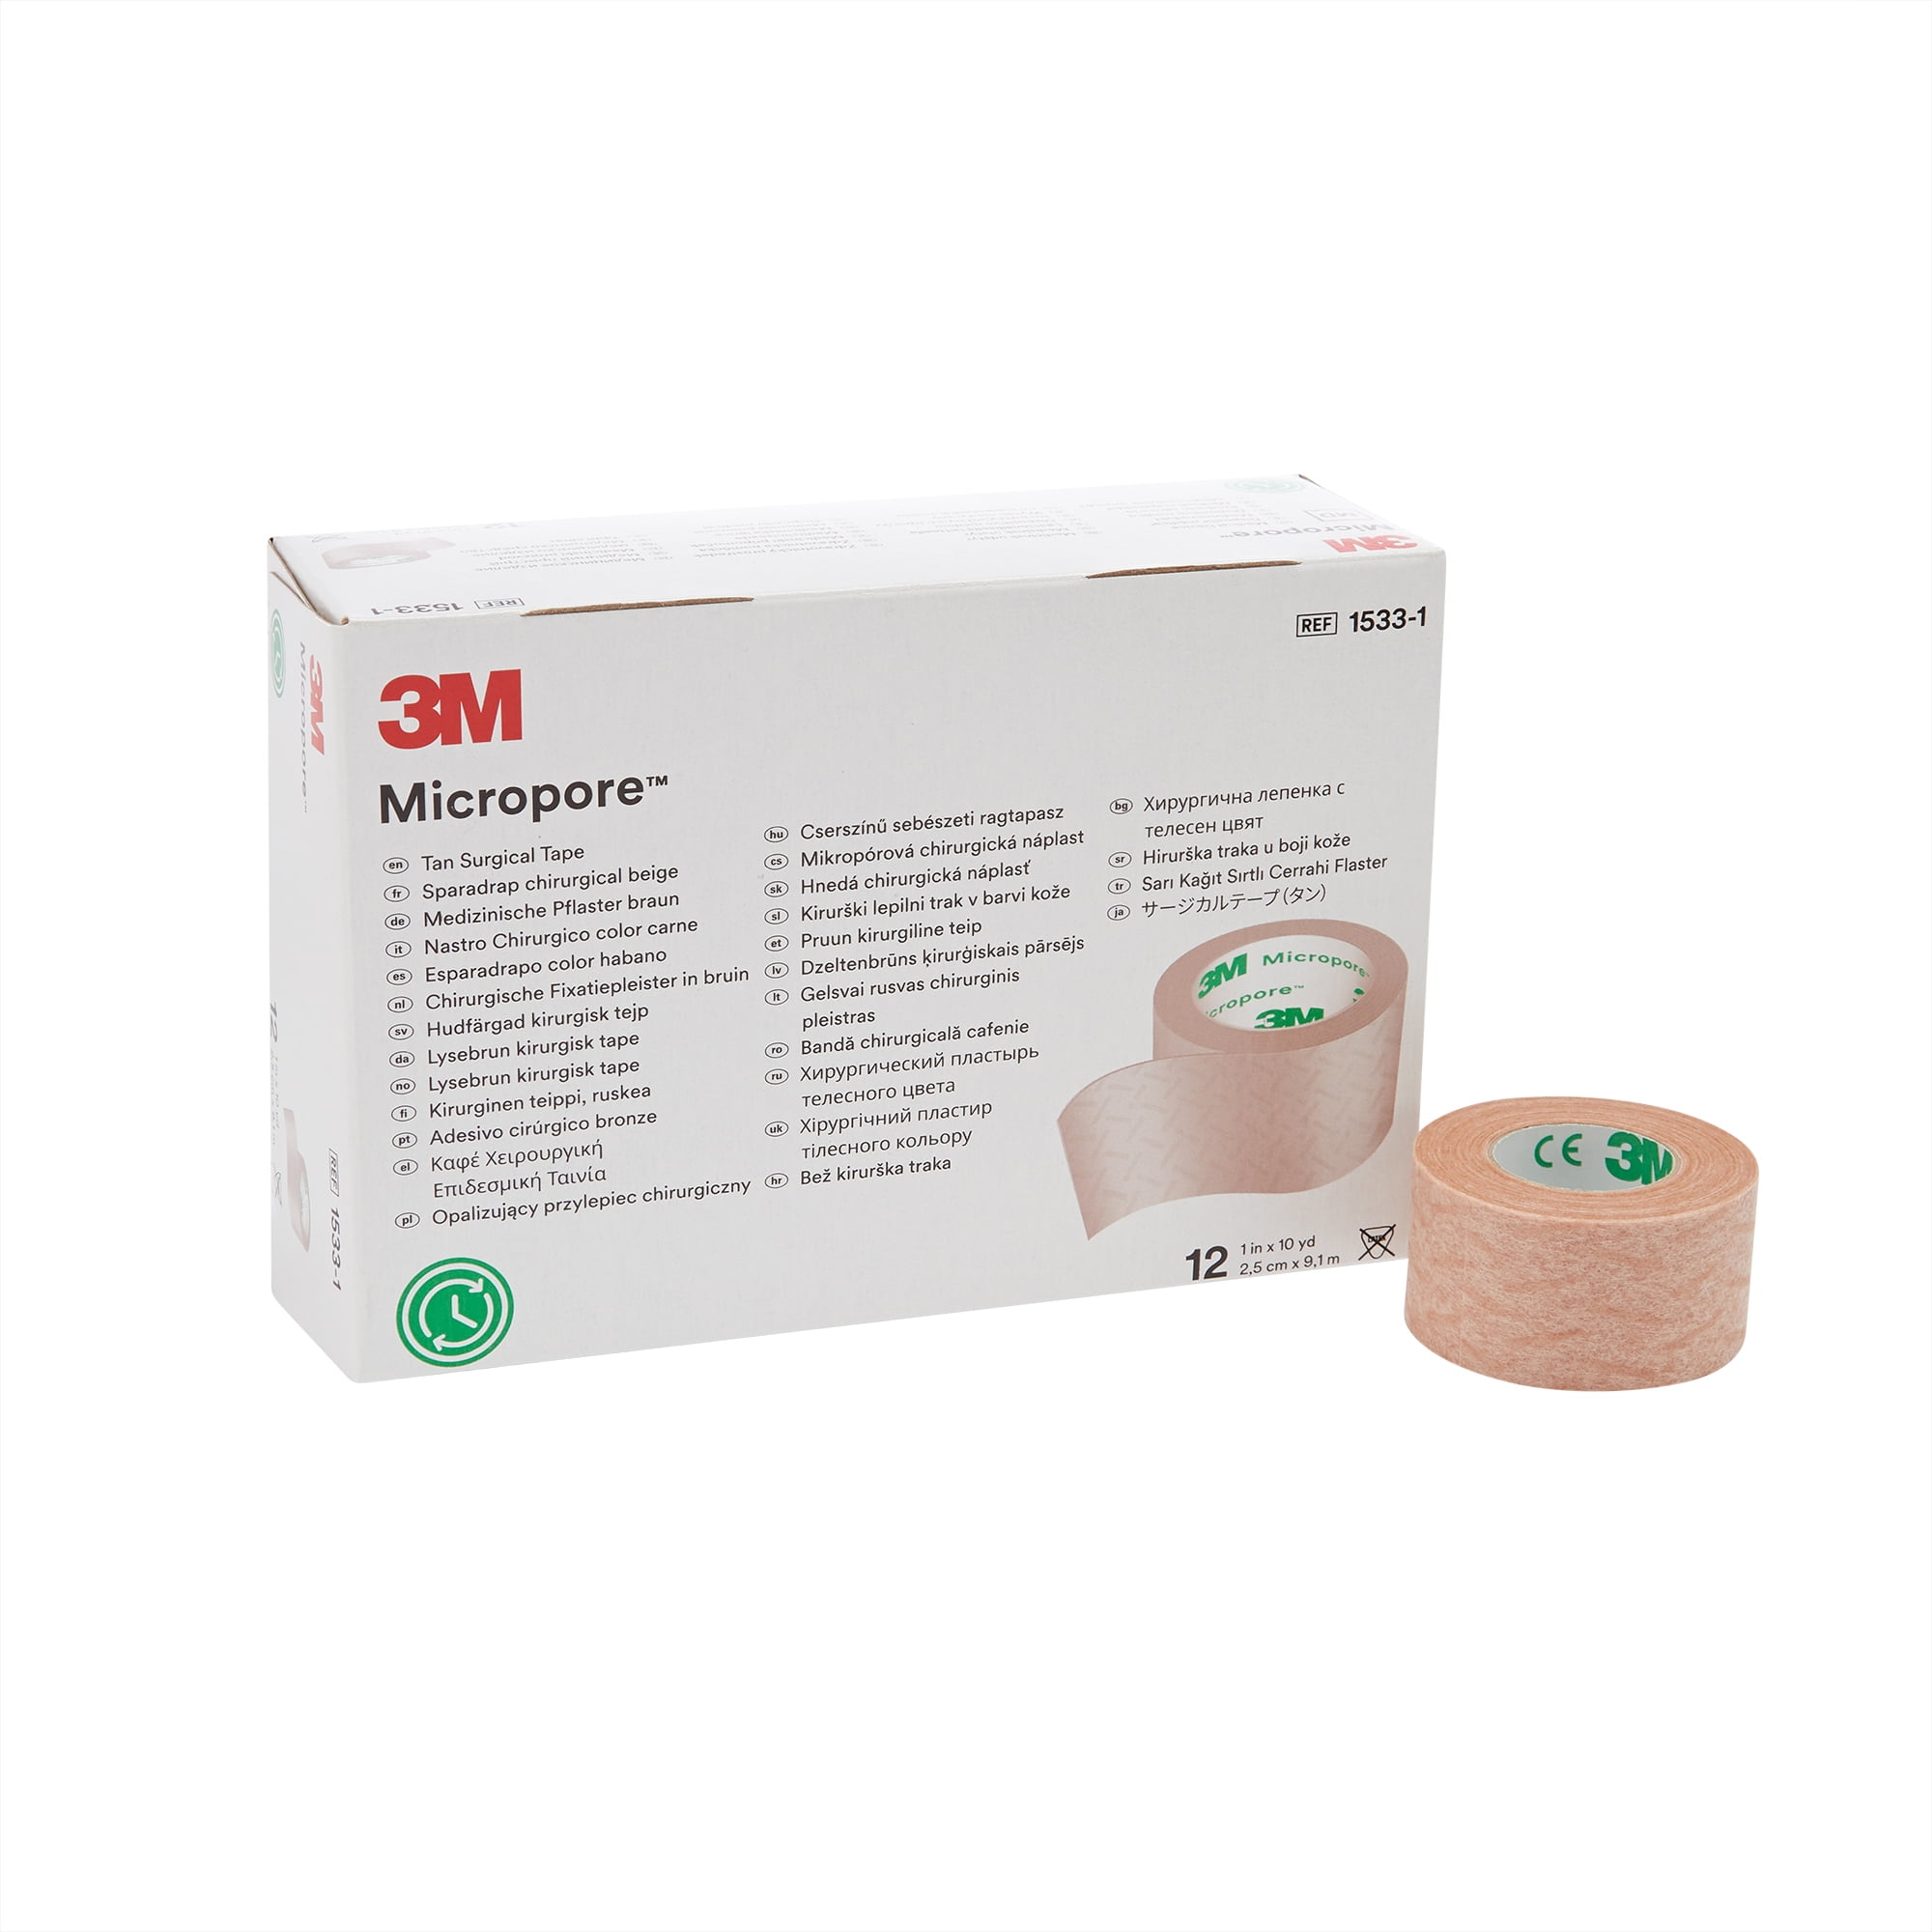 1/2in X 10yd - 3M Micropore Surgical Tape